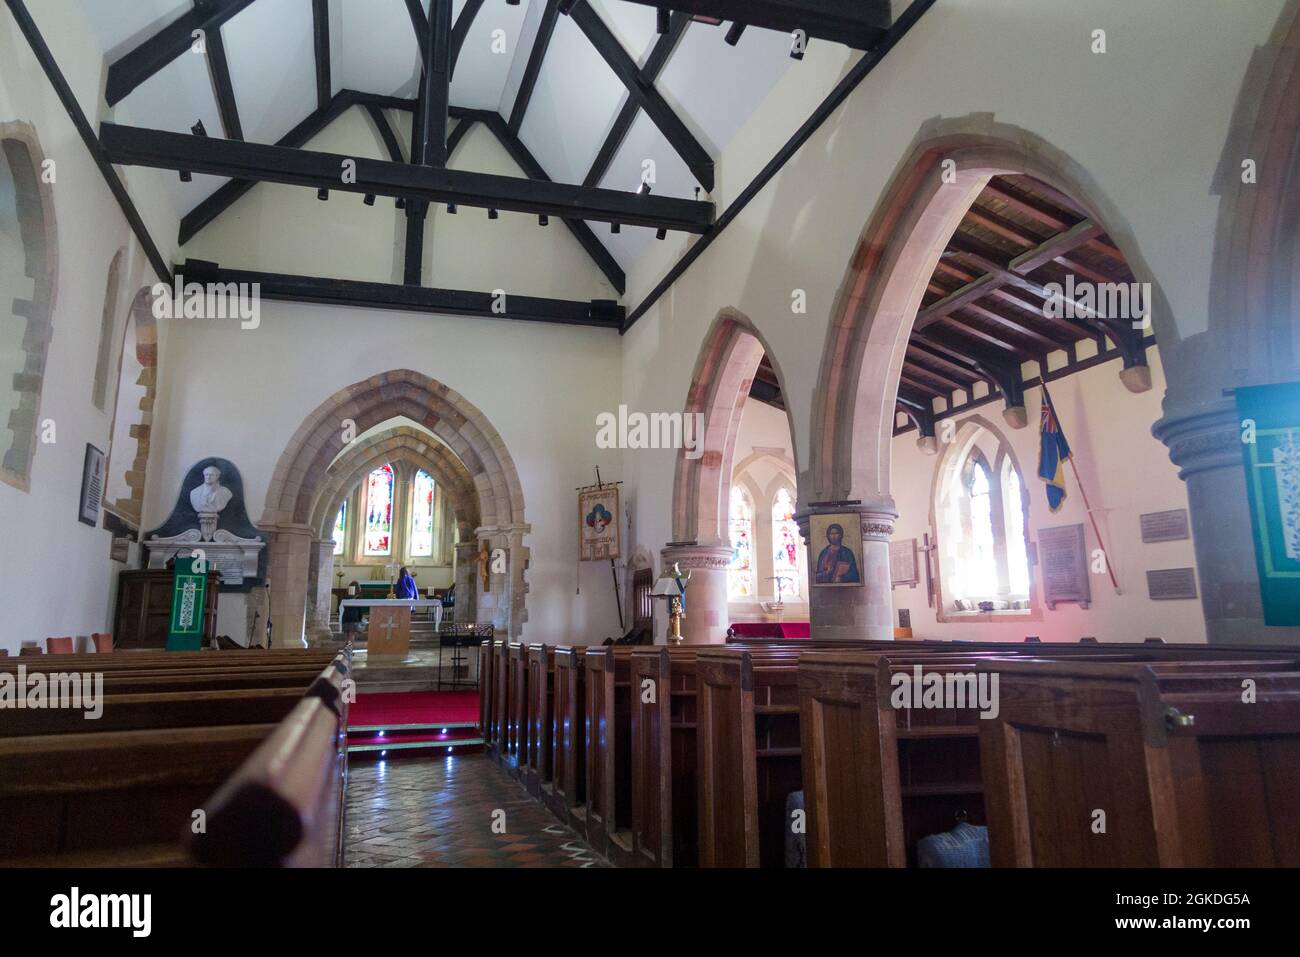 Interior / inside view of the nave looking towards the chancel and high altar of Saint Margaret's Church, Rottingdean, East Sussex England UK (127) Stock Photo